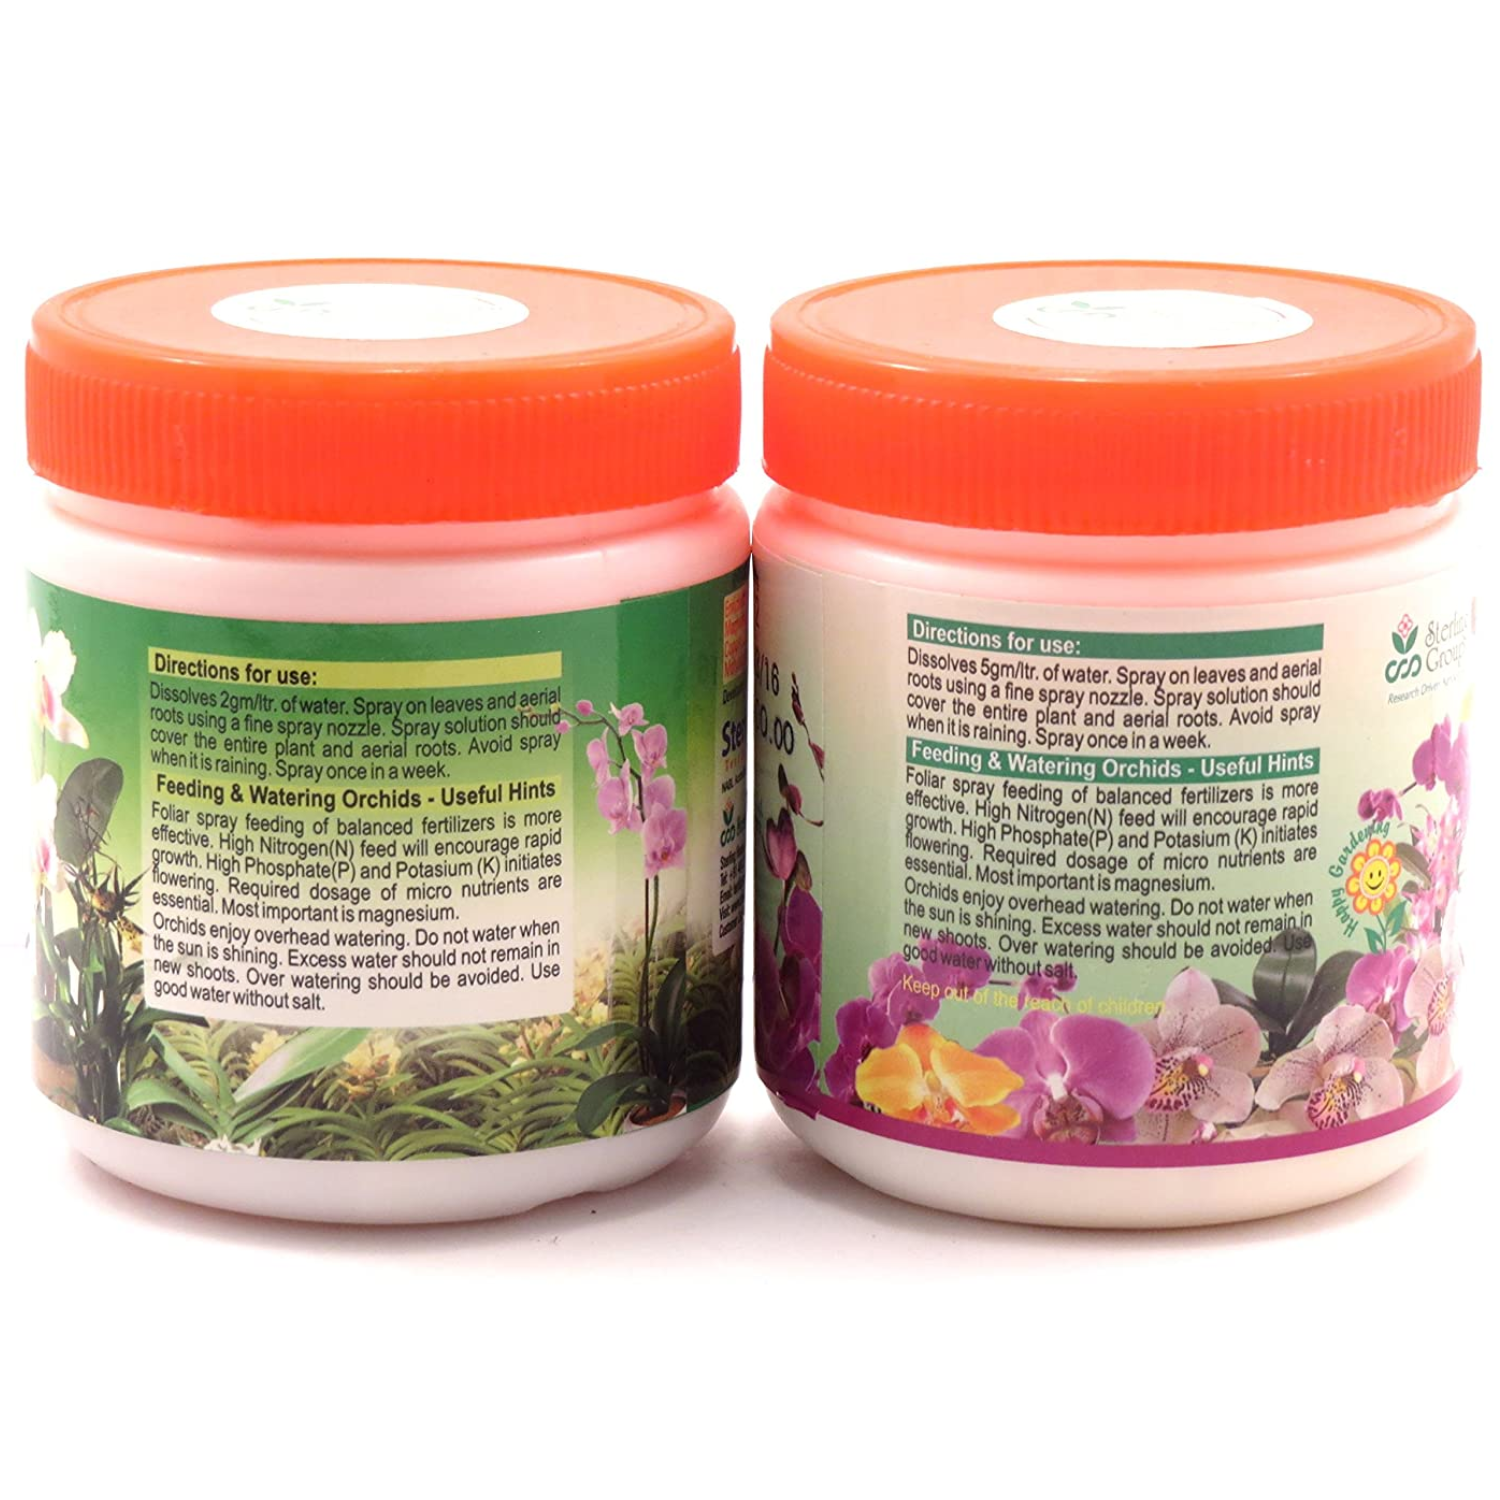 Orchid Boon - Fertilizer Kit (for orchid flowering and growth)